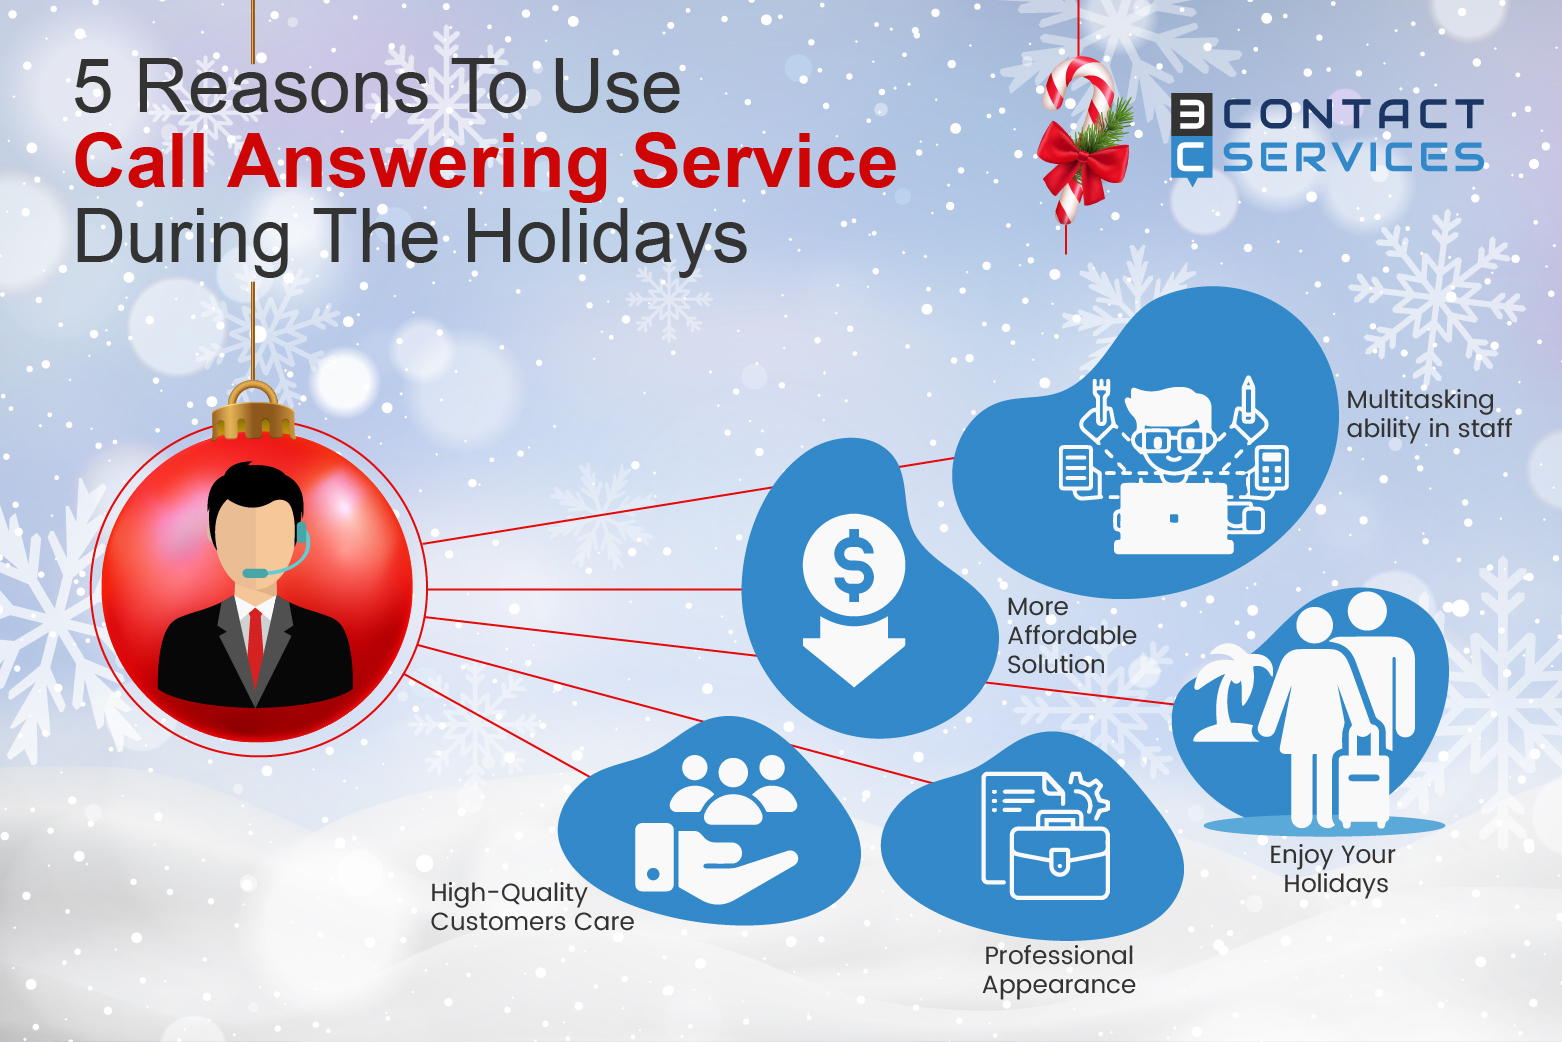 5 Reasons To Use Call Answering Service During The Holidays